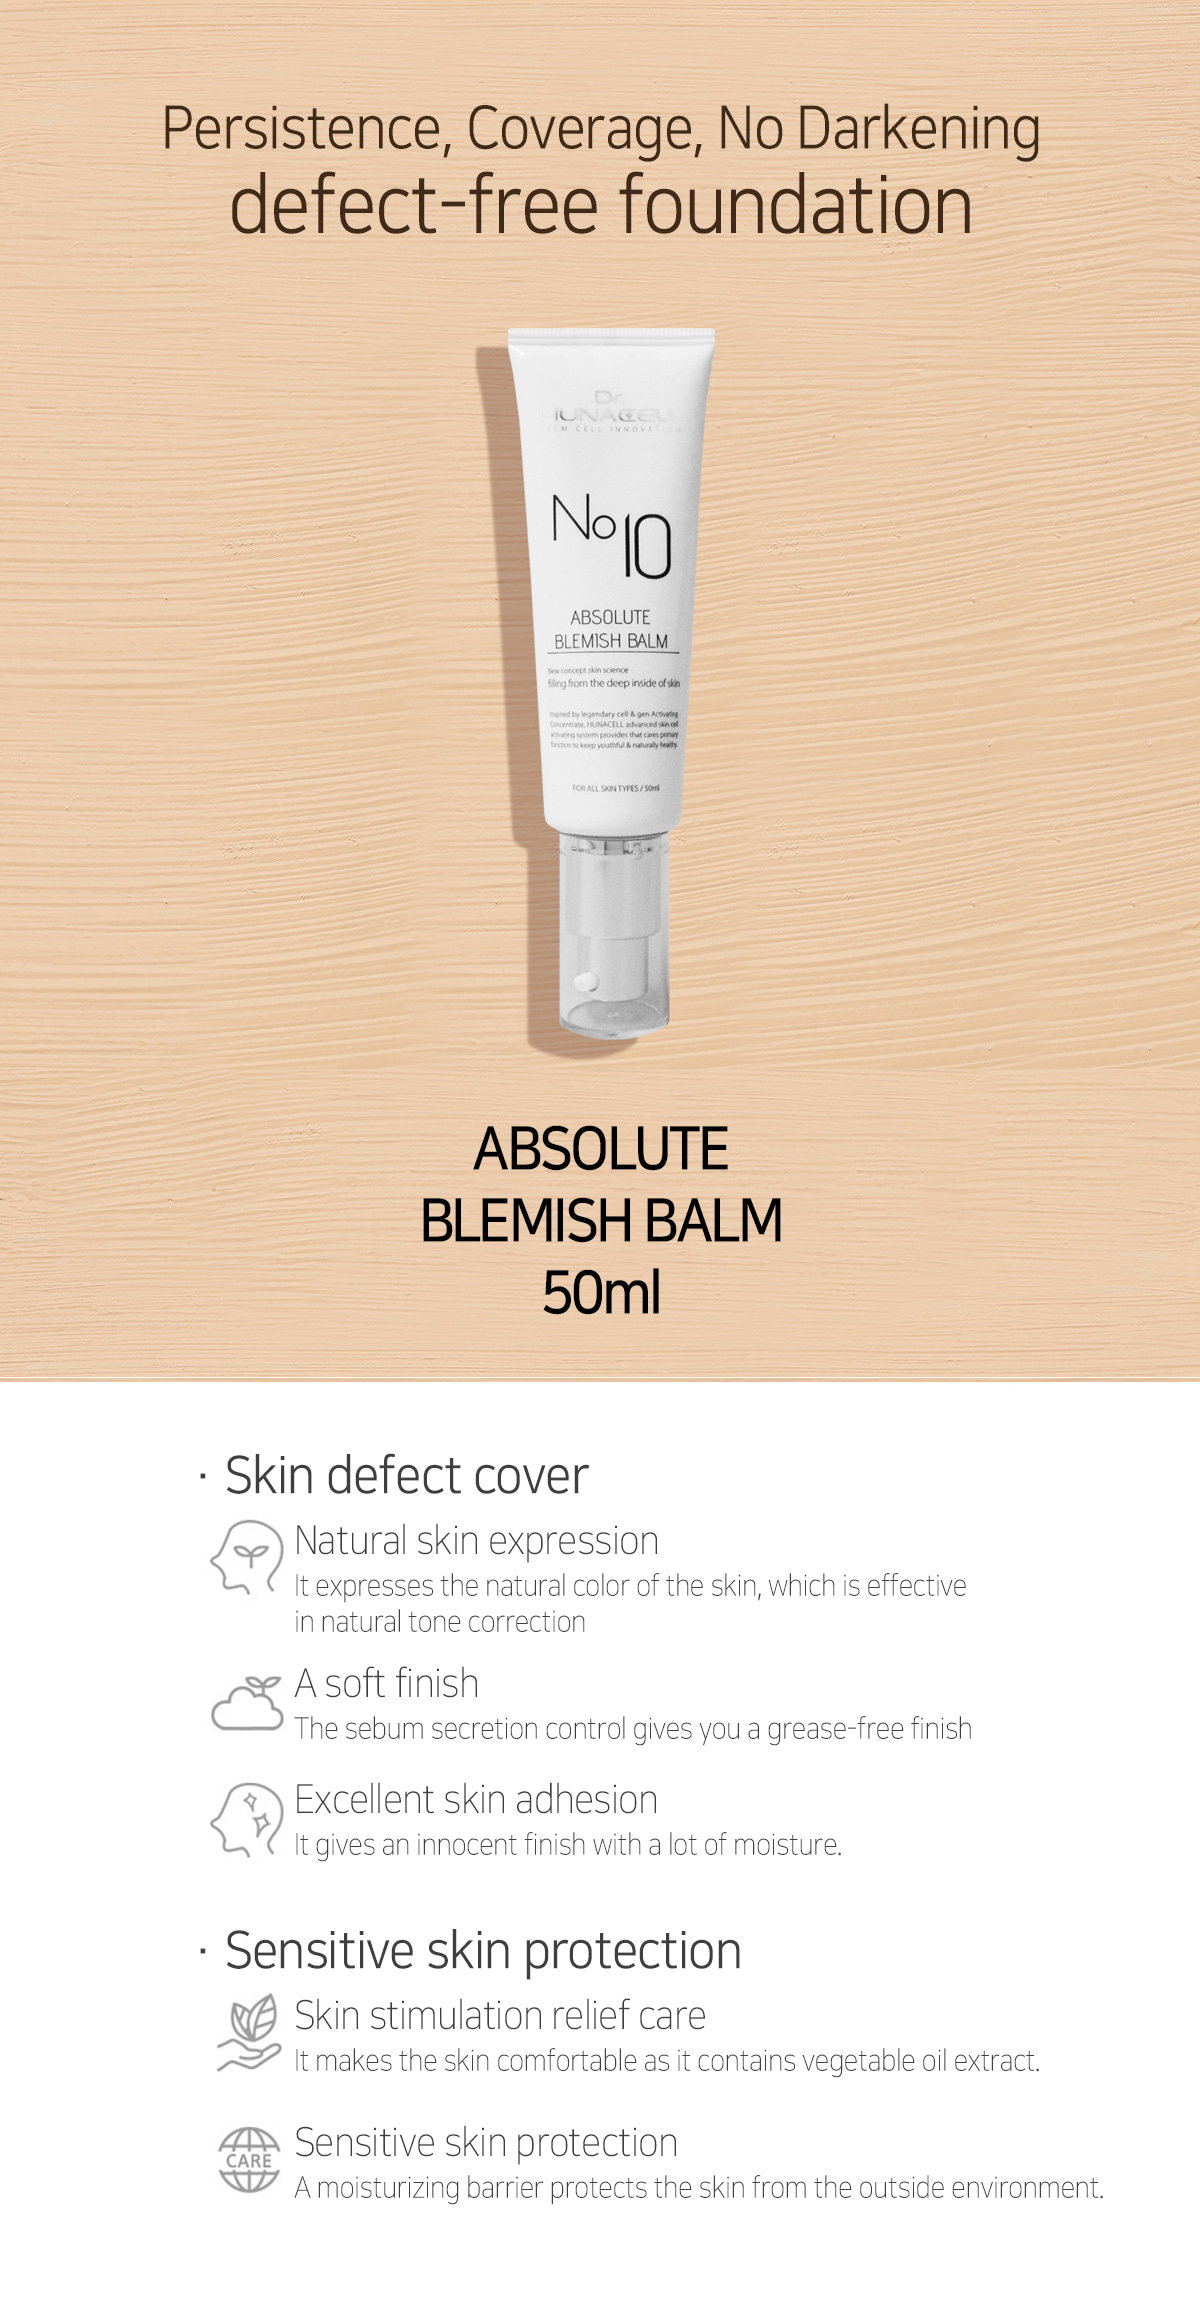 Dr.hunacell - Absolute Blemish Balm (50ml) X100EA FOR B2B · Eects of skin tone naturally on the skin
· Moisturizing skin keeps moisture moist and moist
· The whitening eect that you use